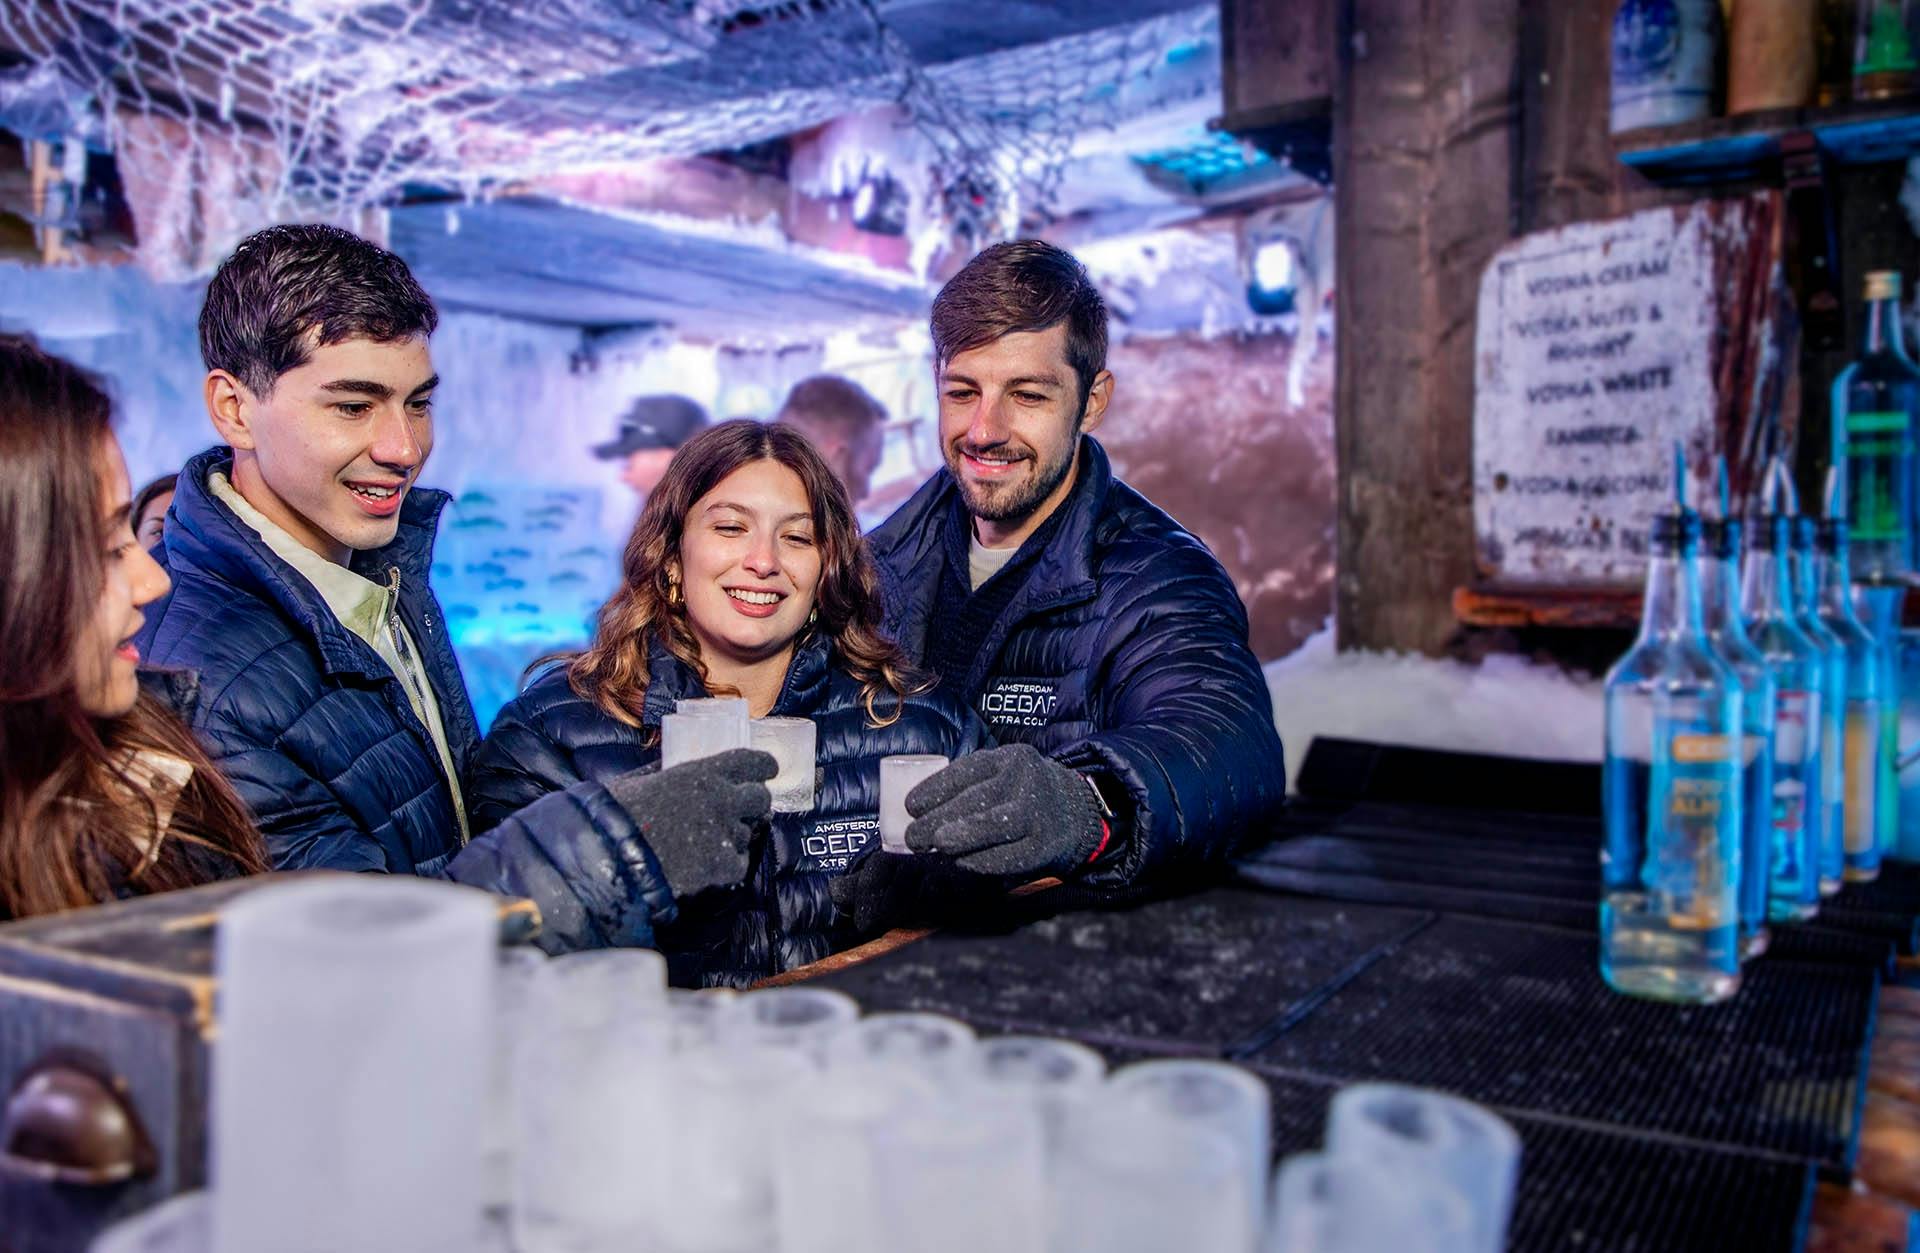 XtraCold Amsterdam Icebar fast-track tickets